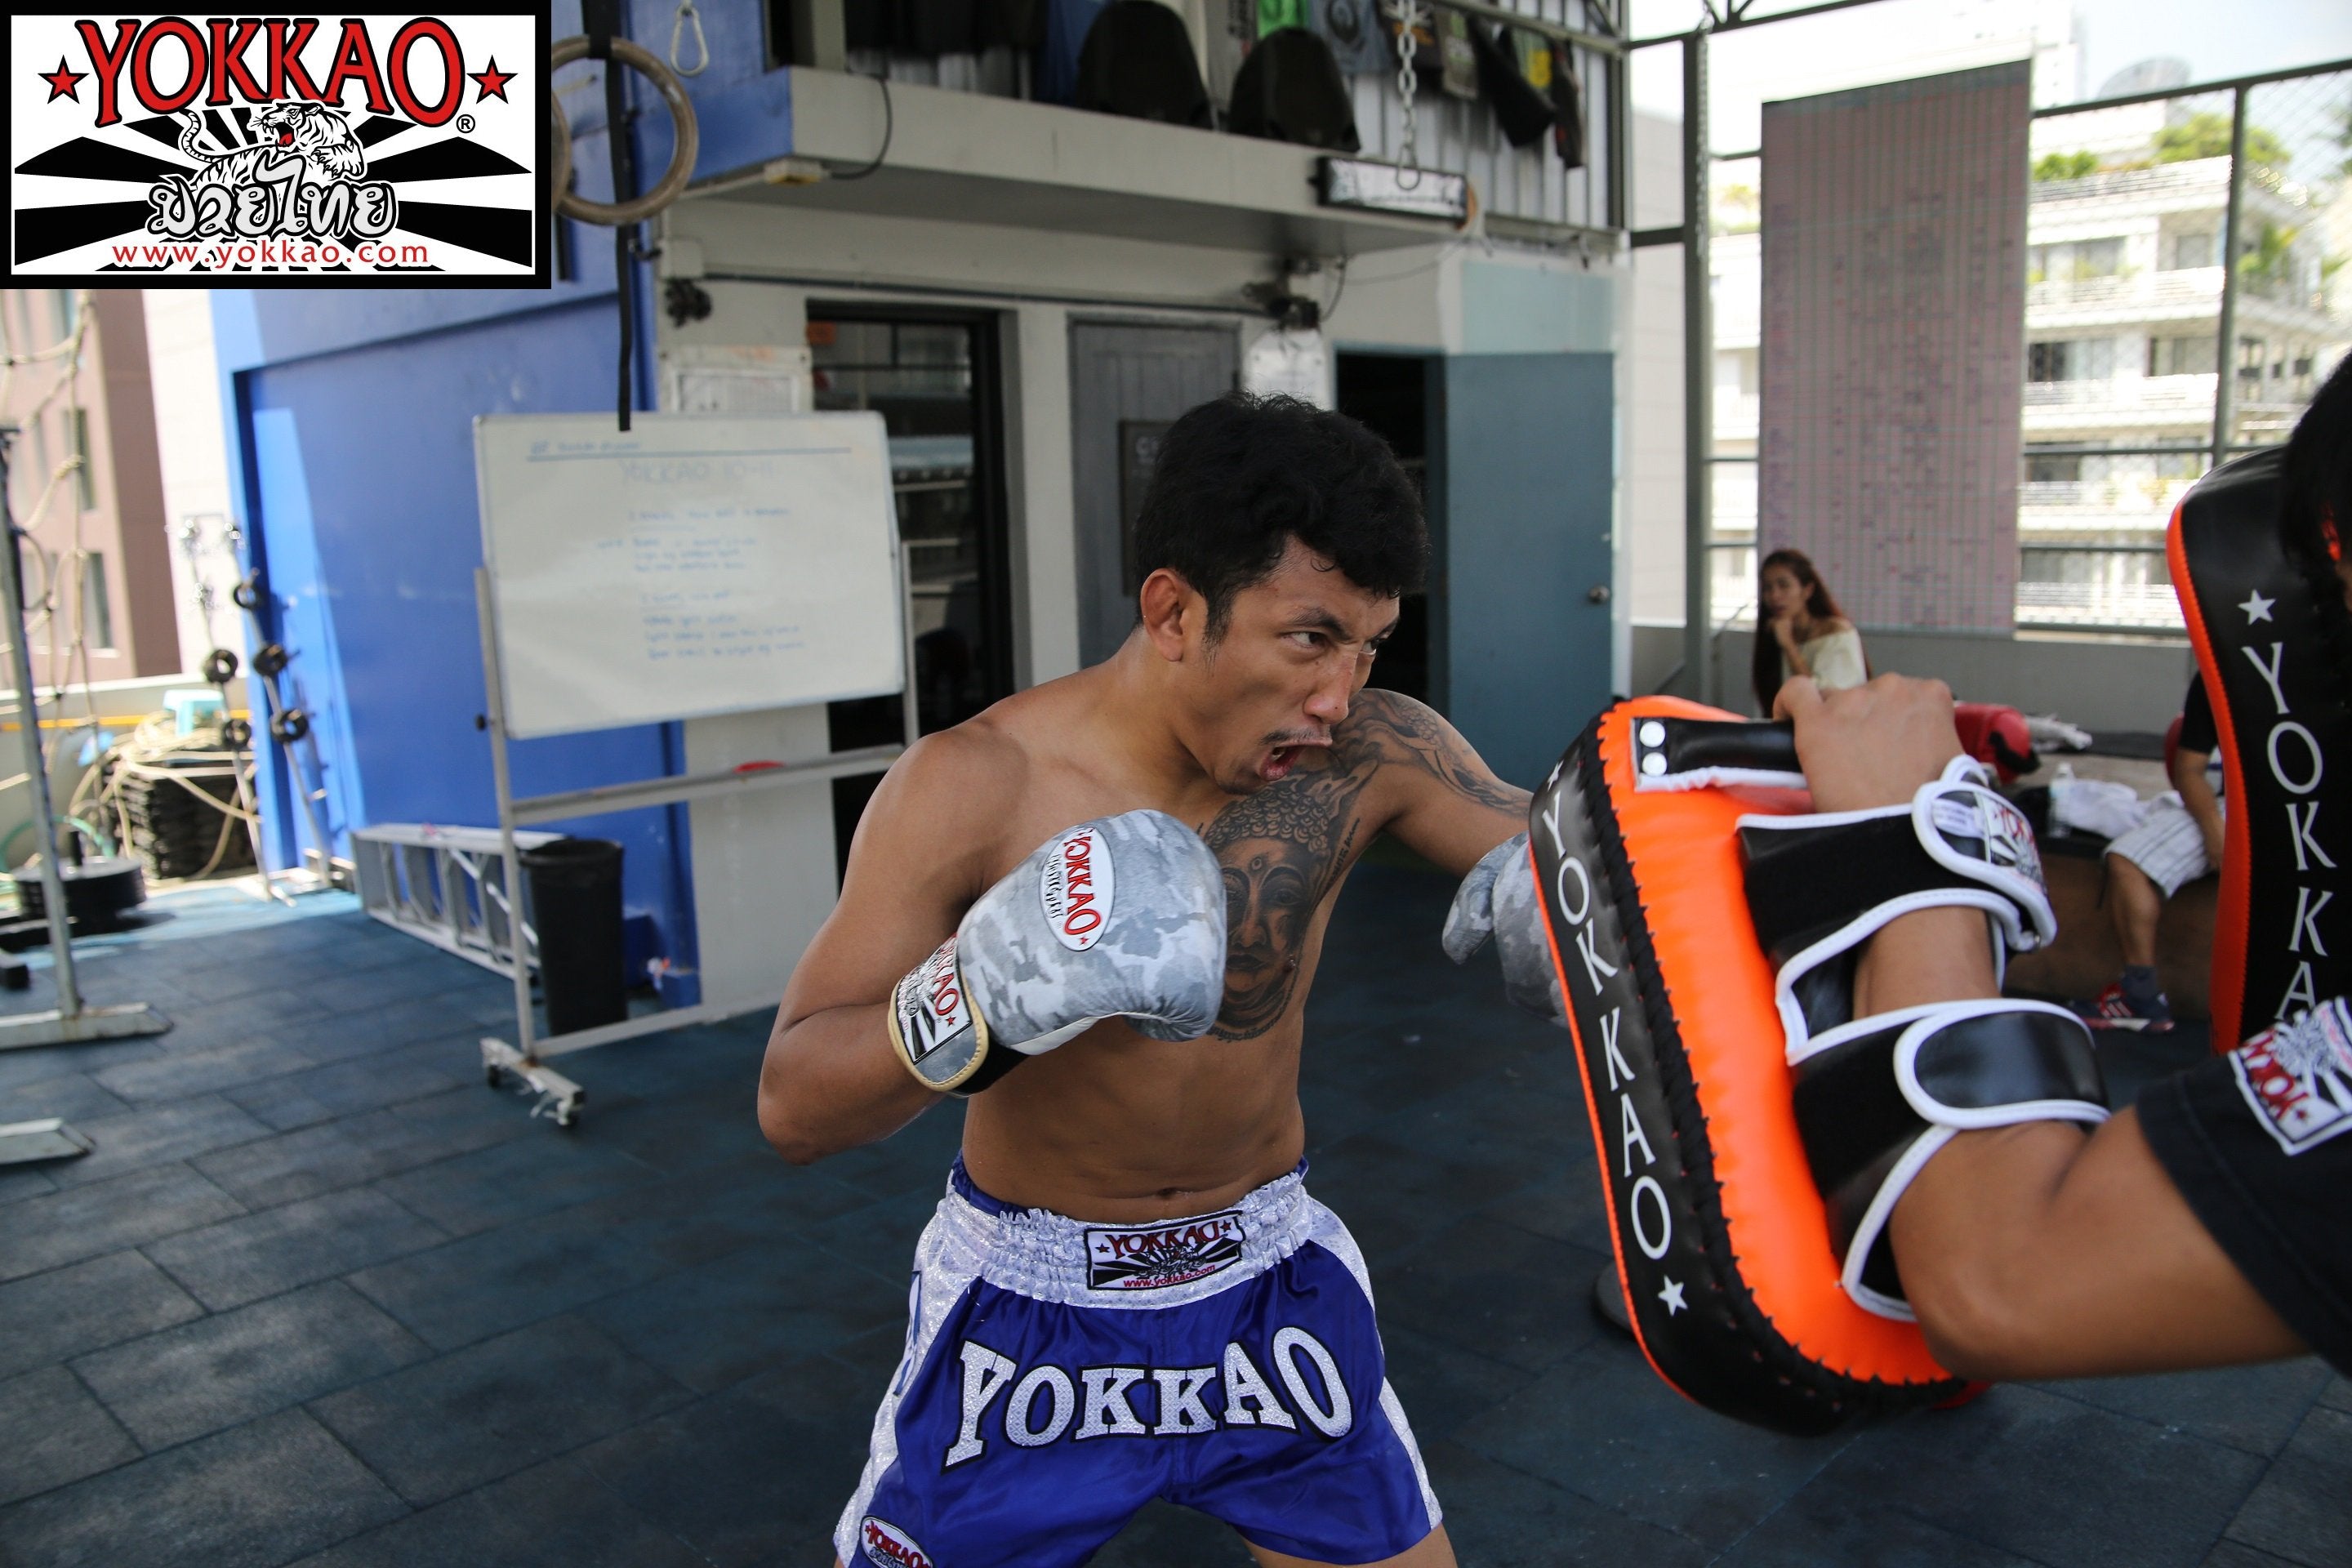 YOKKAO Breaking into the Market with Latest Innovation to Kicking Pads!